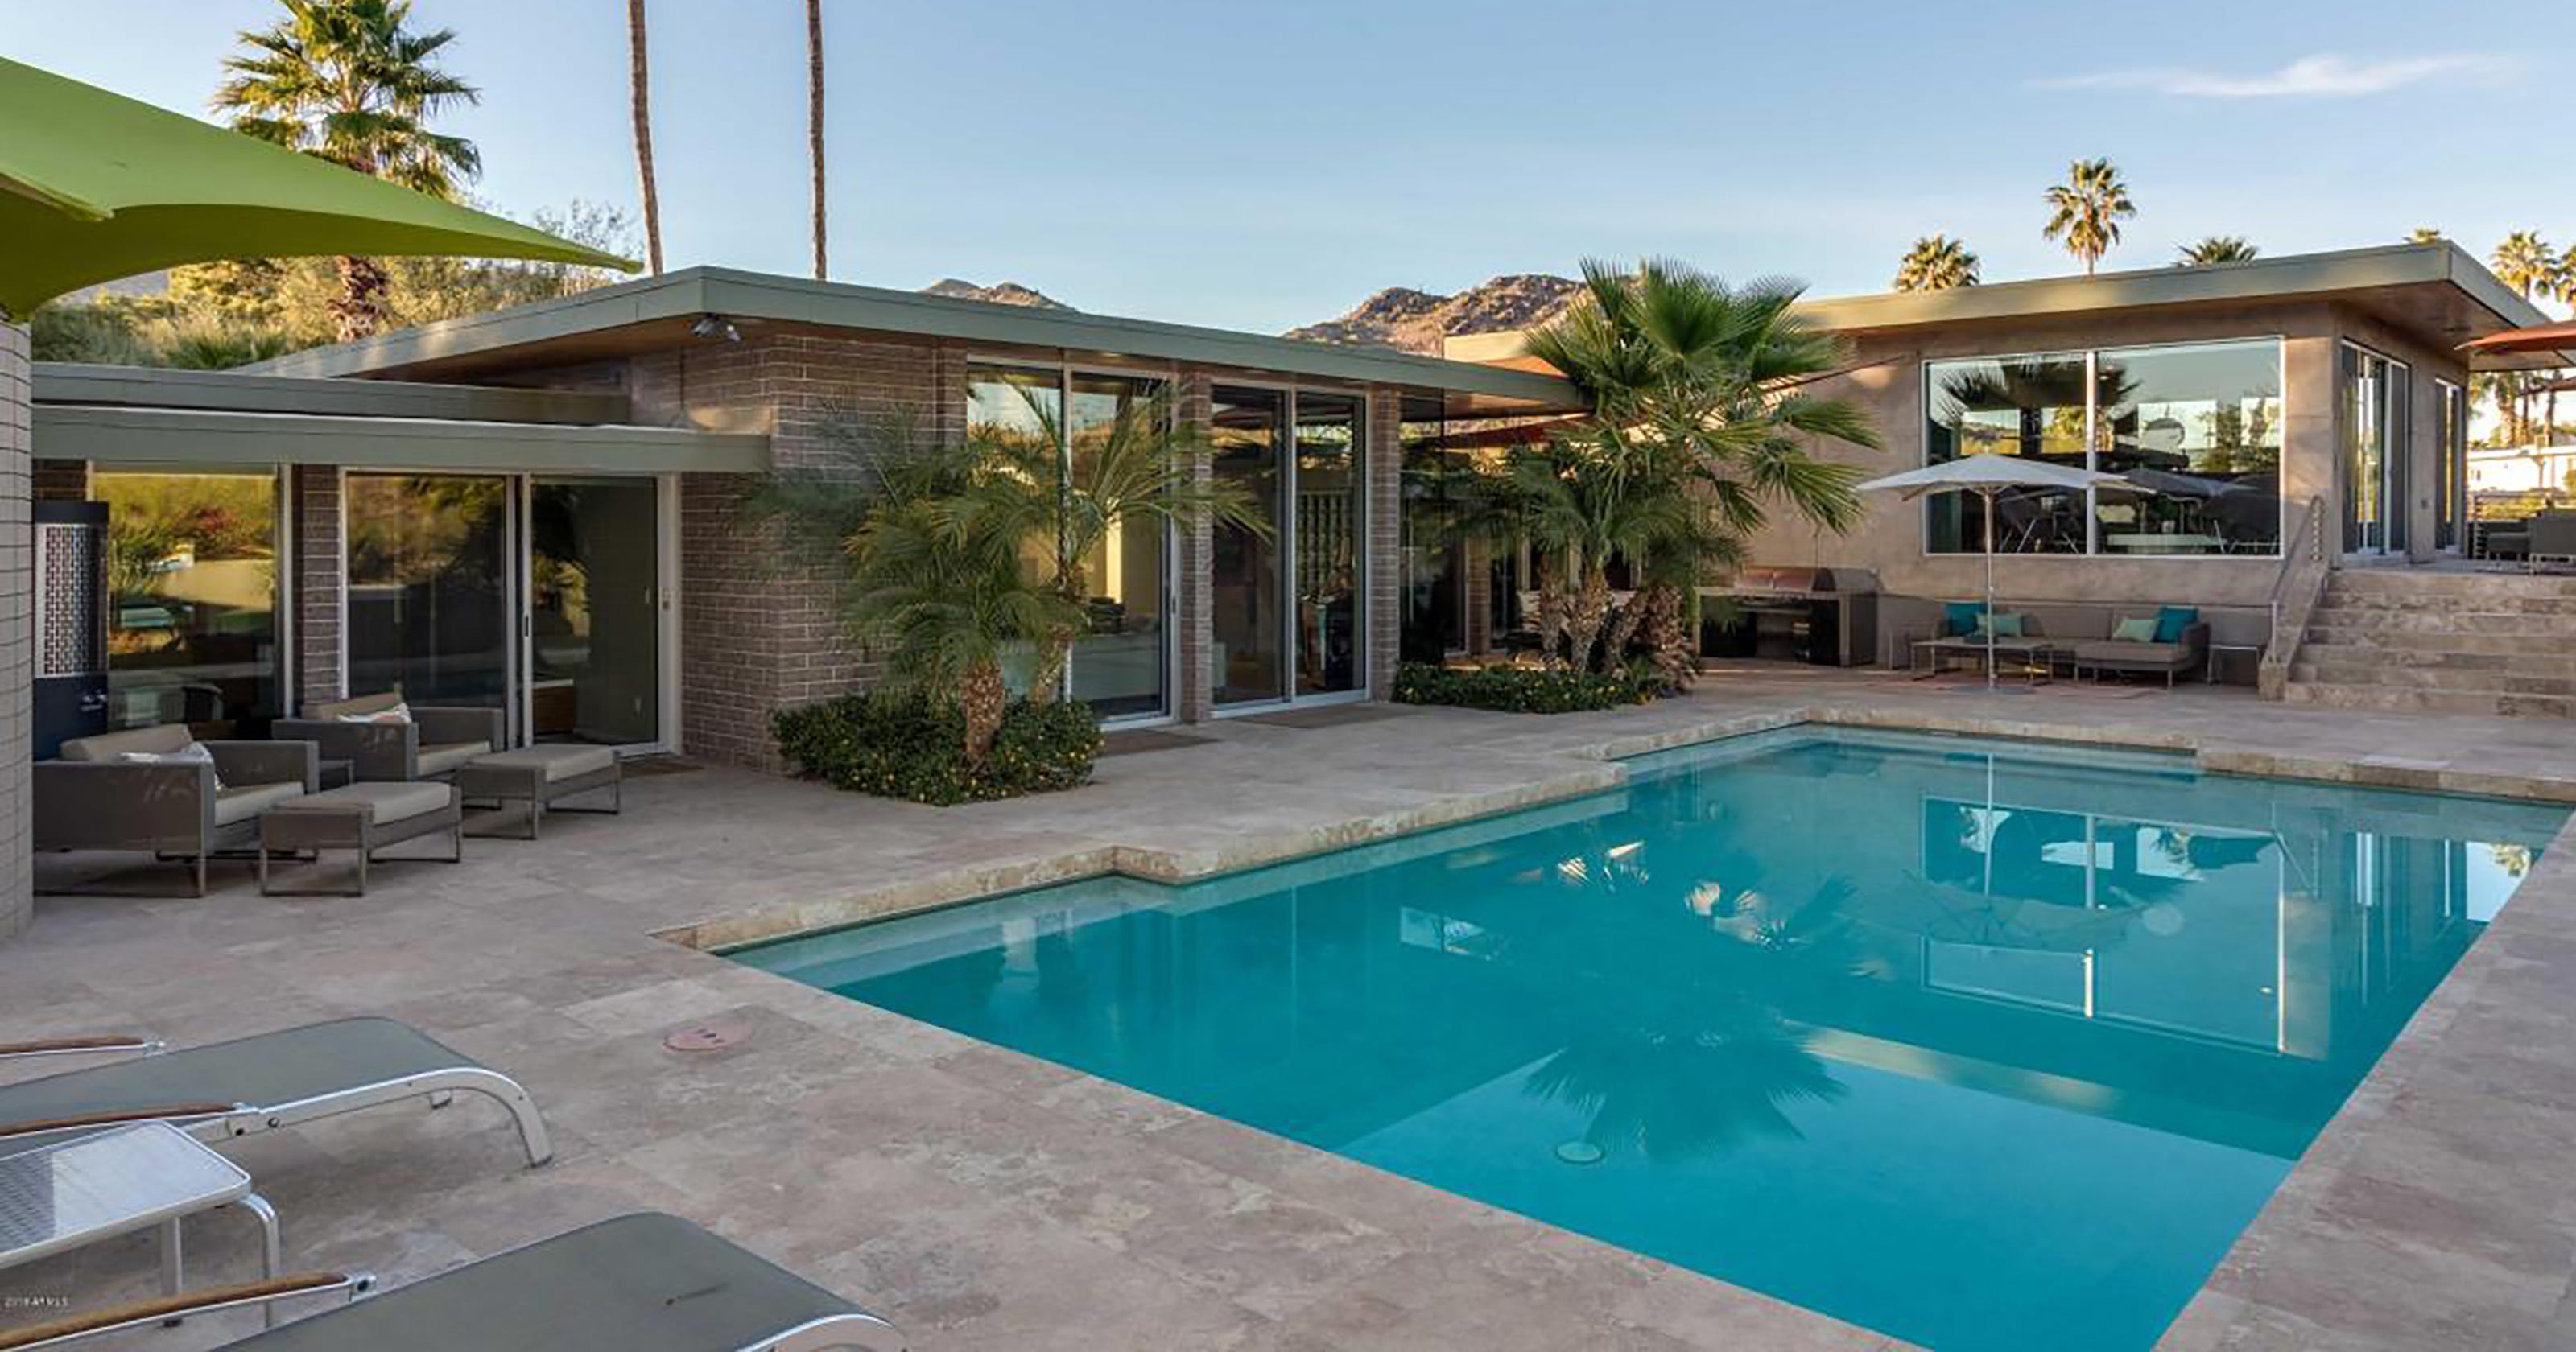 Arizona mansion for sale used as set for porn website.